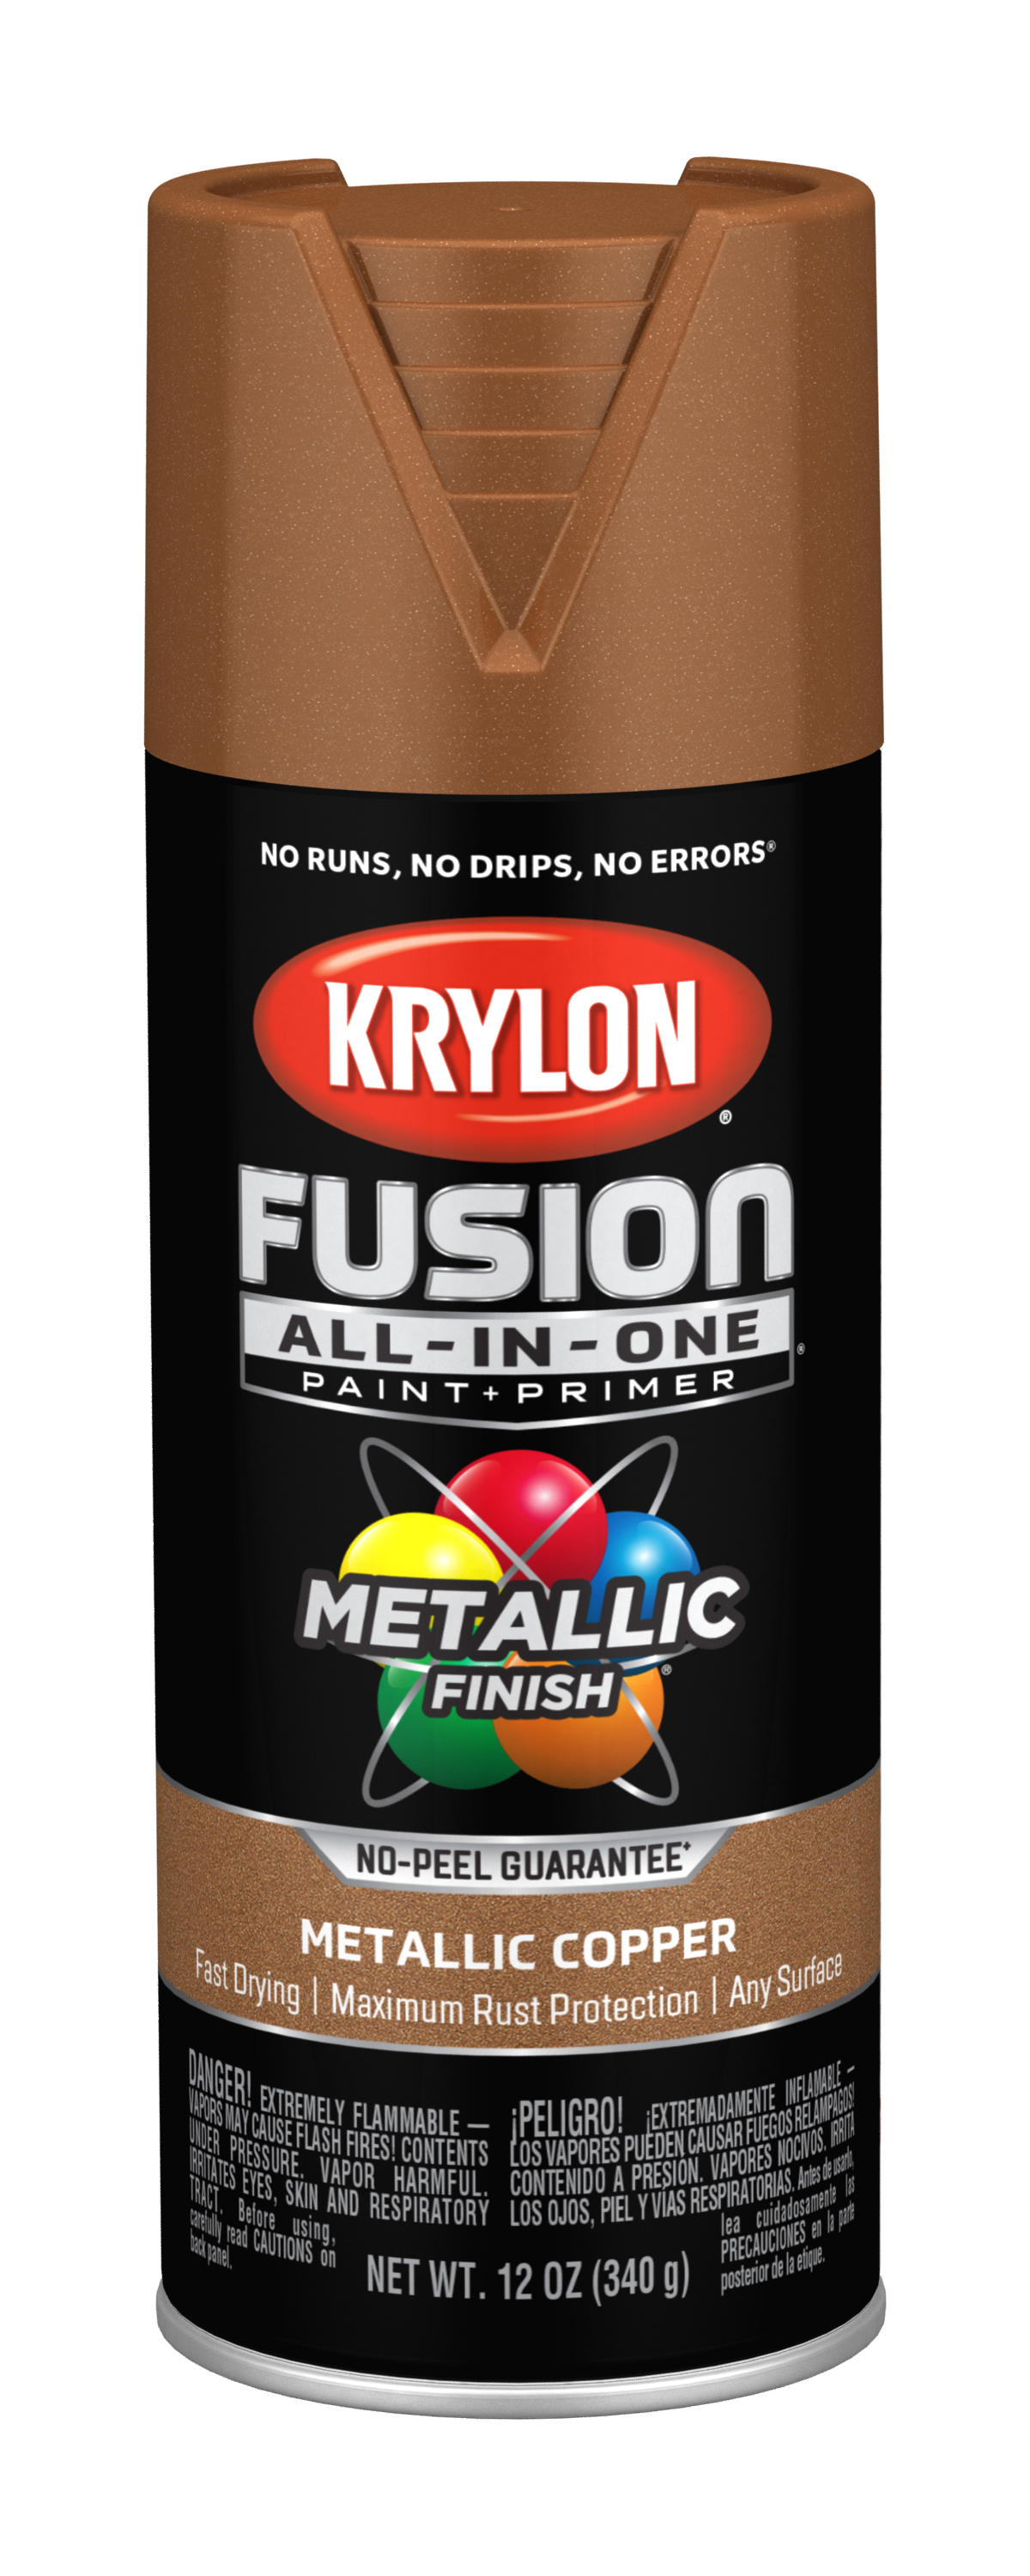 Krylon Fusion All-In-One Spray Paint, Metallic Copper, 12 oz. - image 2 of 10